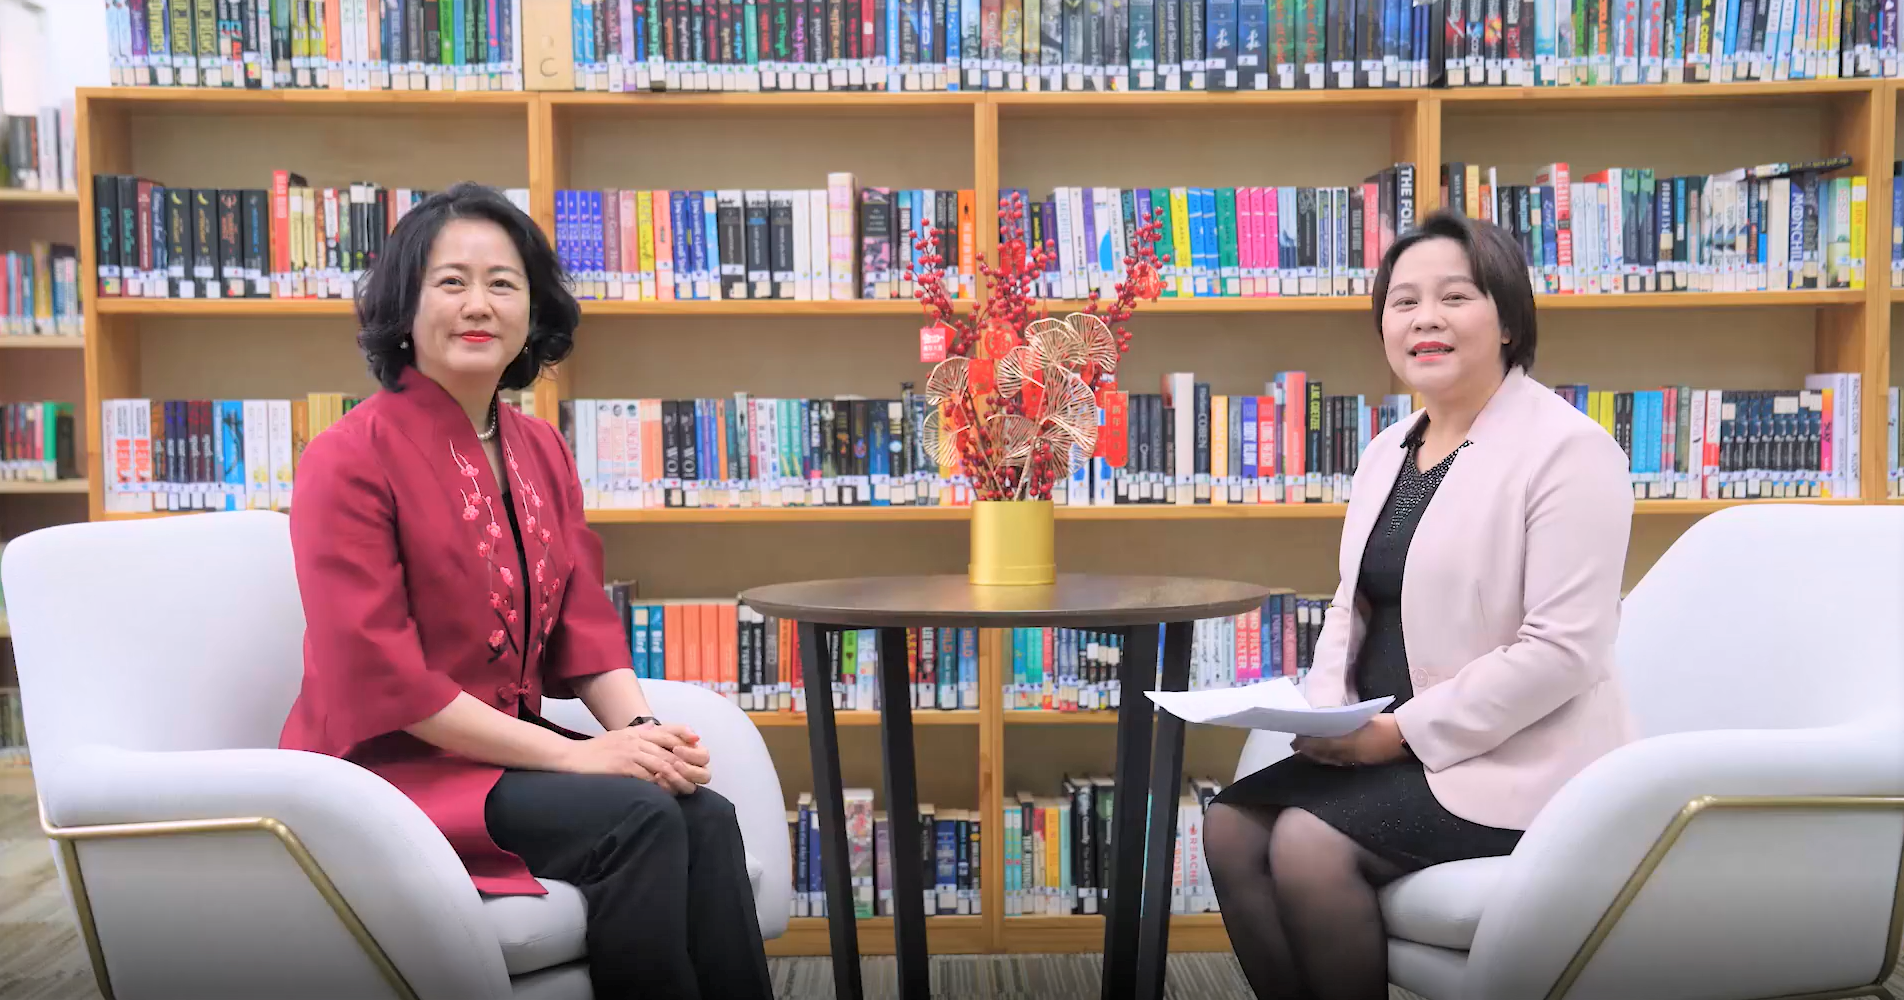 In conversation with Joy Qiao, Founder and Chairman -1 